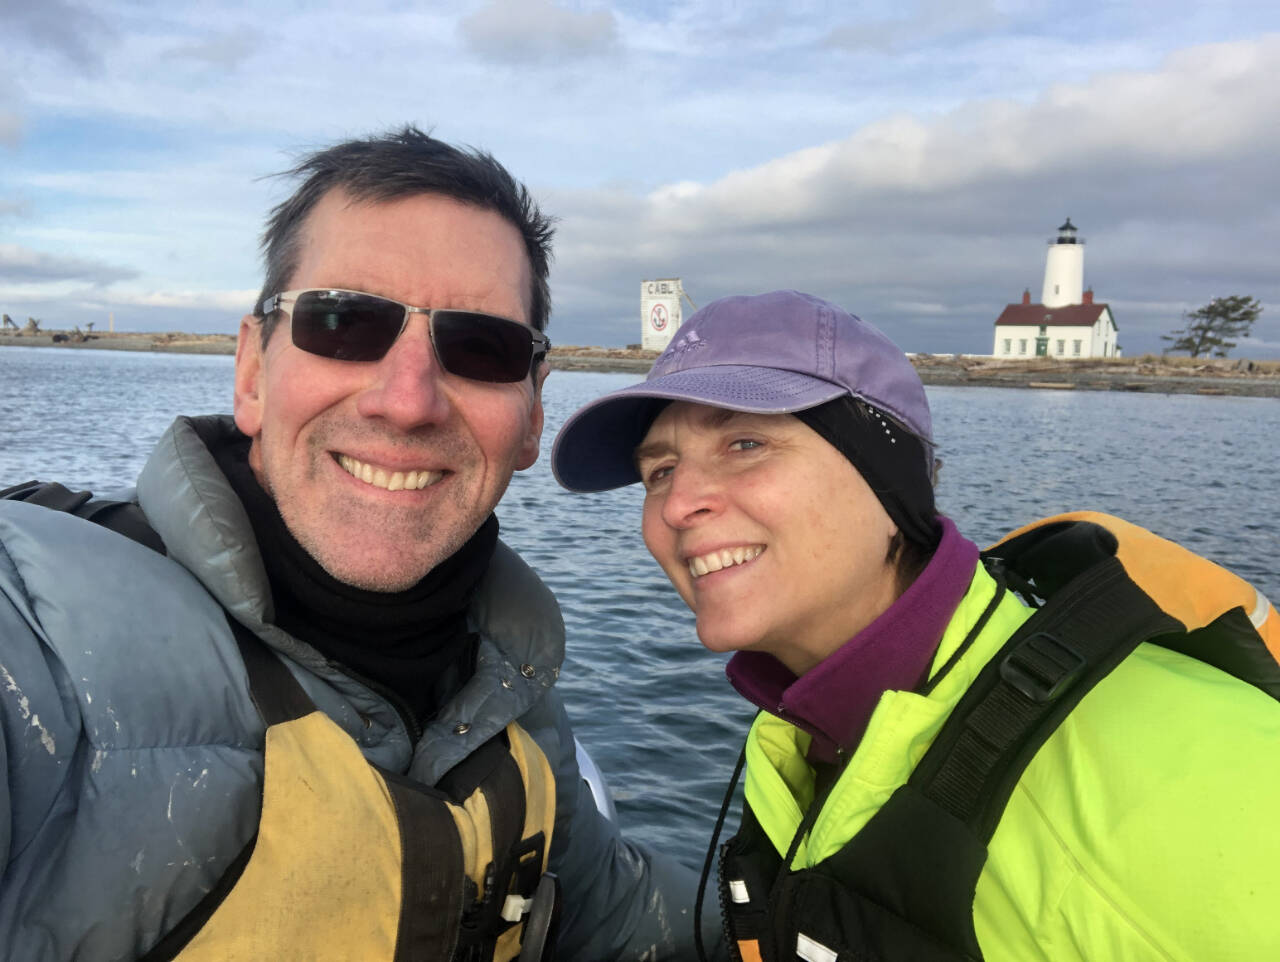 Photo courtesy of Sequim Bay yacht Club
Jeanne Neal, who rowed in The Head of the Charles Regatta race in 2019 and 2022, and her husband Guy Lawrence will speak about the race with Sequim Bay Yacht Club members on April 12 at John Wayne Marina. The public is invited.